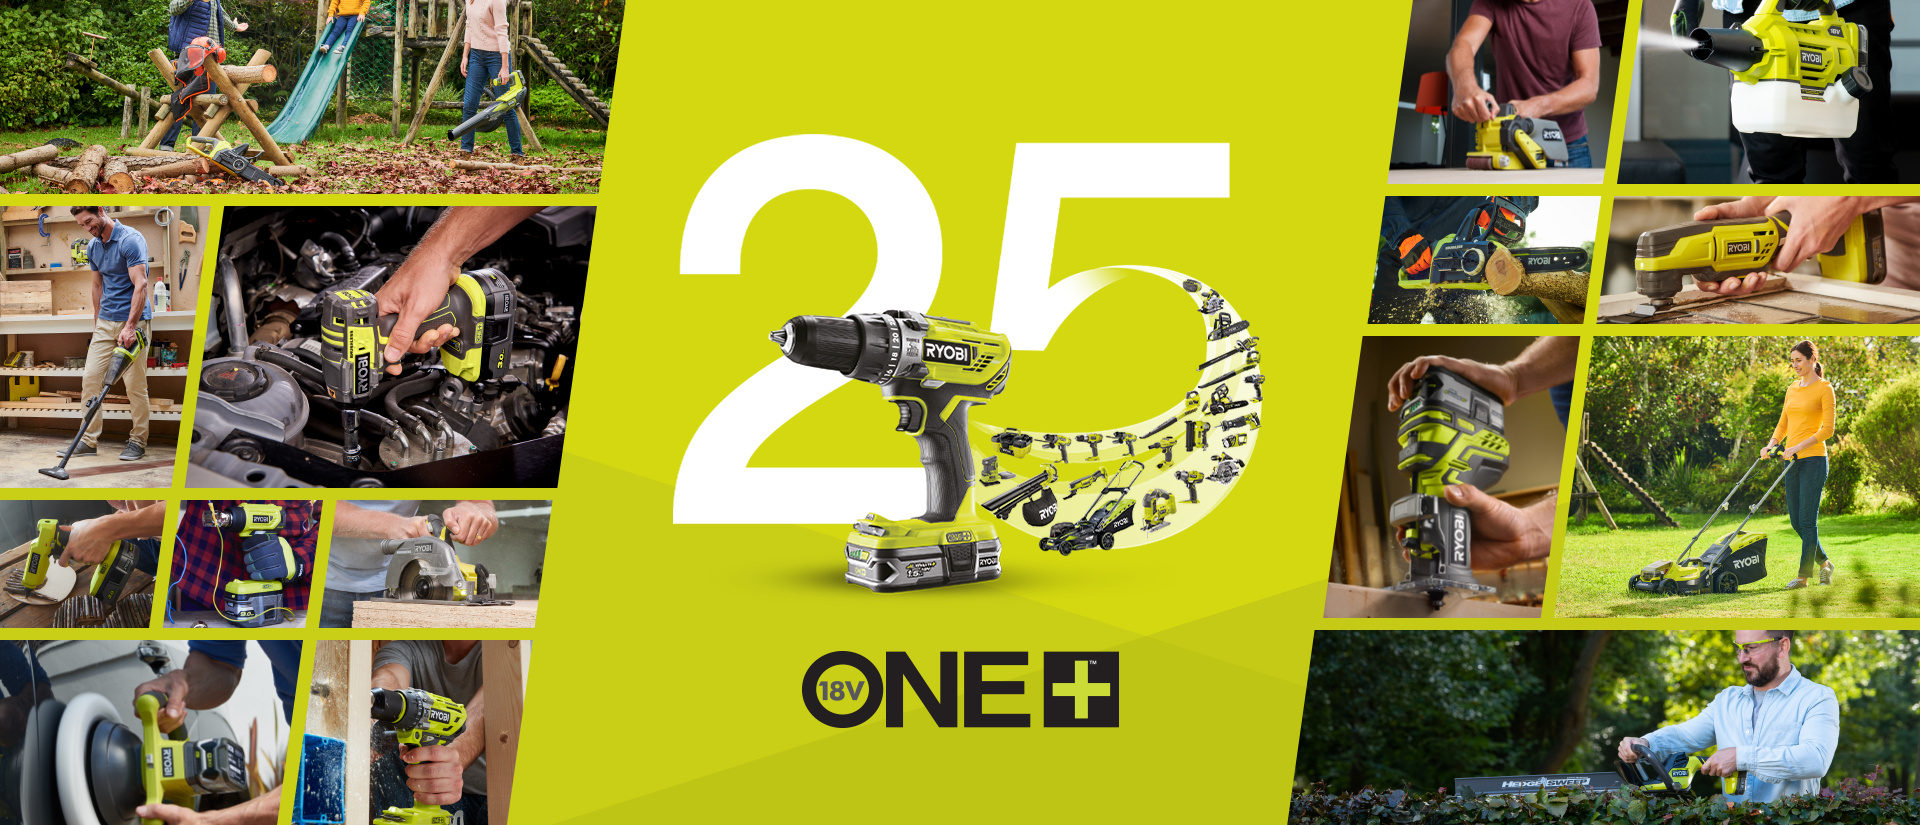 25 Years of ONE+